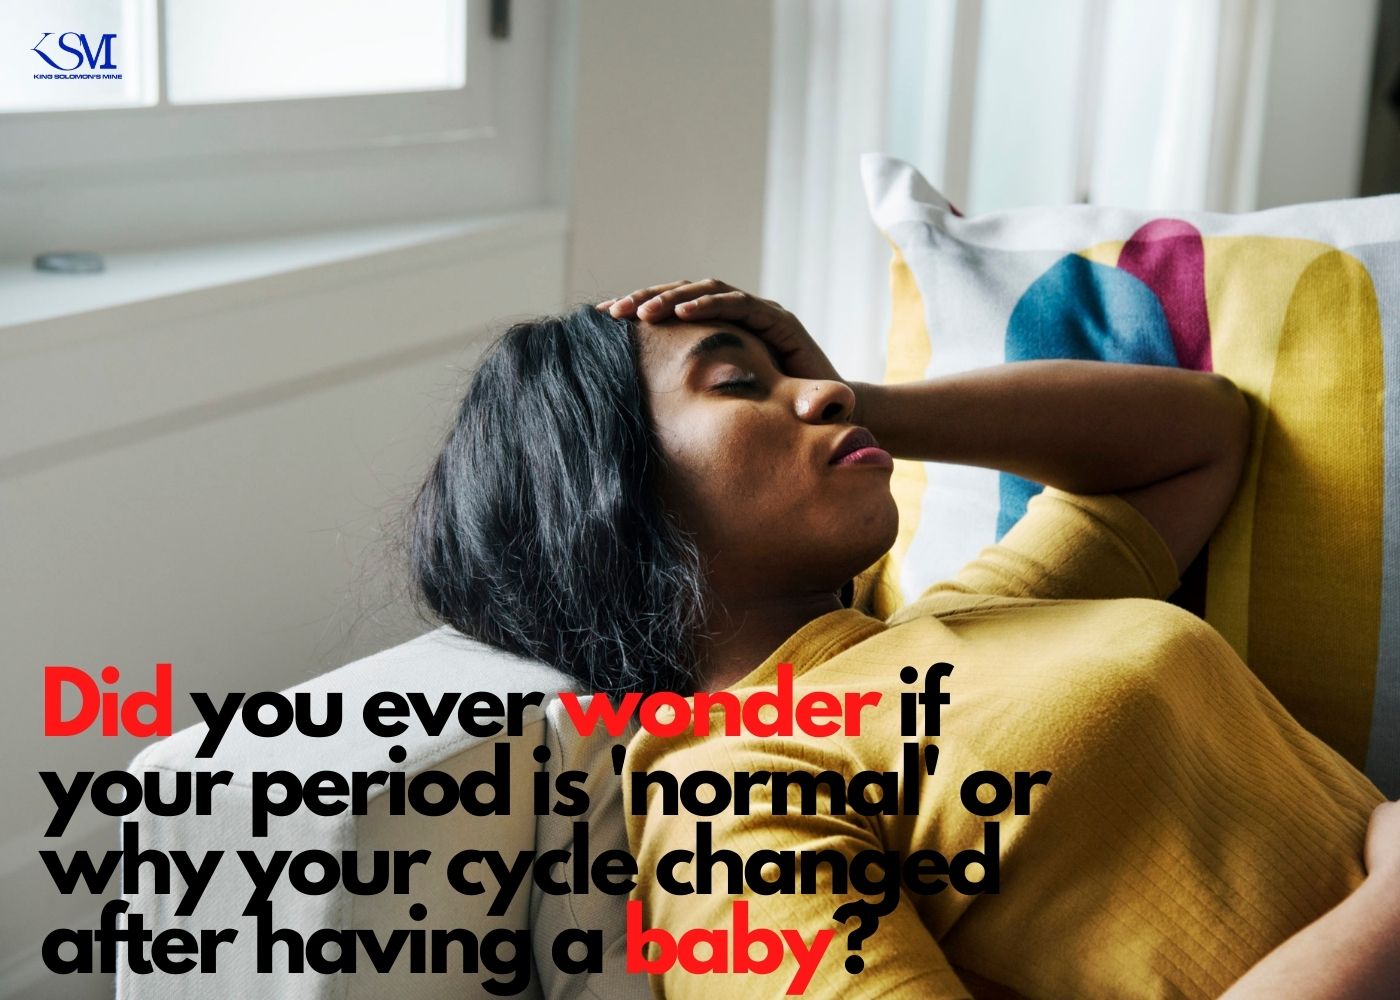 Did you ever wonder if your period is 'normal' or why your cycle changed after having a baby?